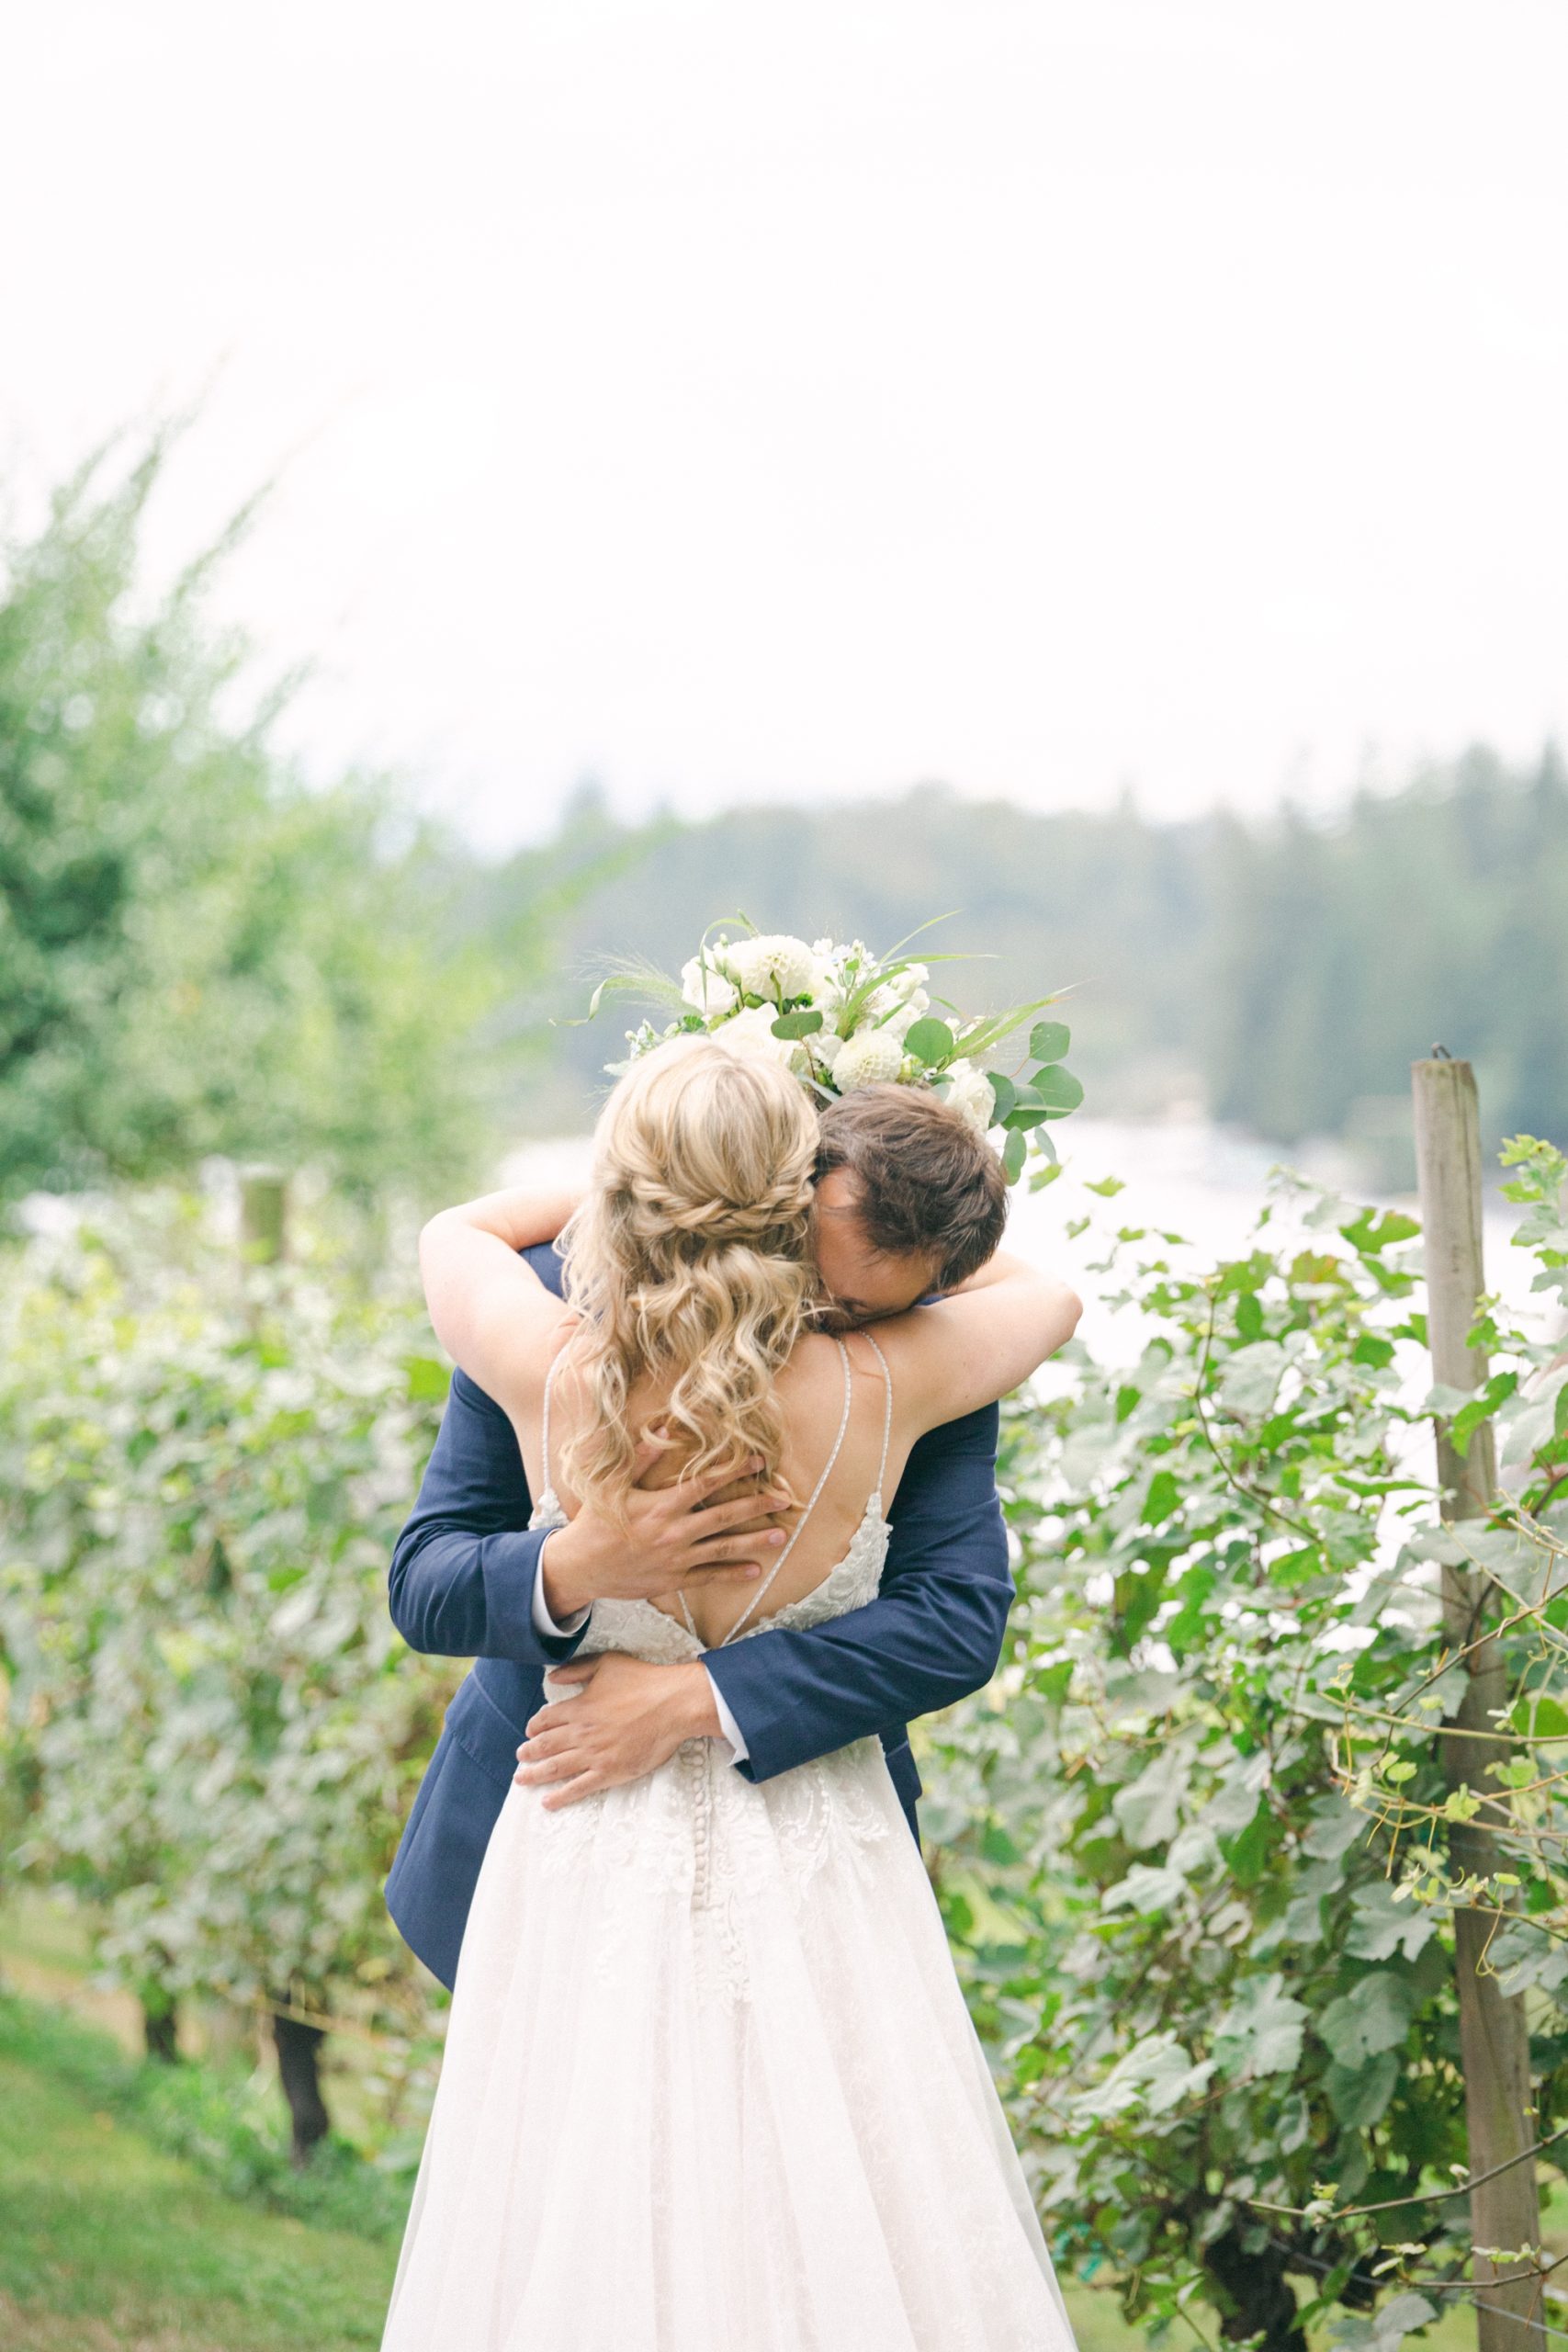 Green Gates at Flowing Lake Wedding in the fall by Snohomish Wedding Photographers Something Minted